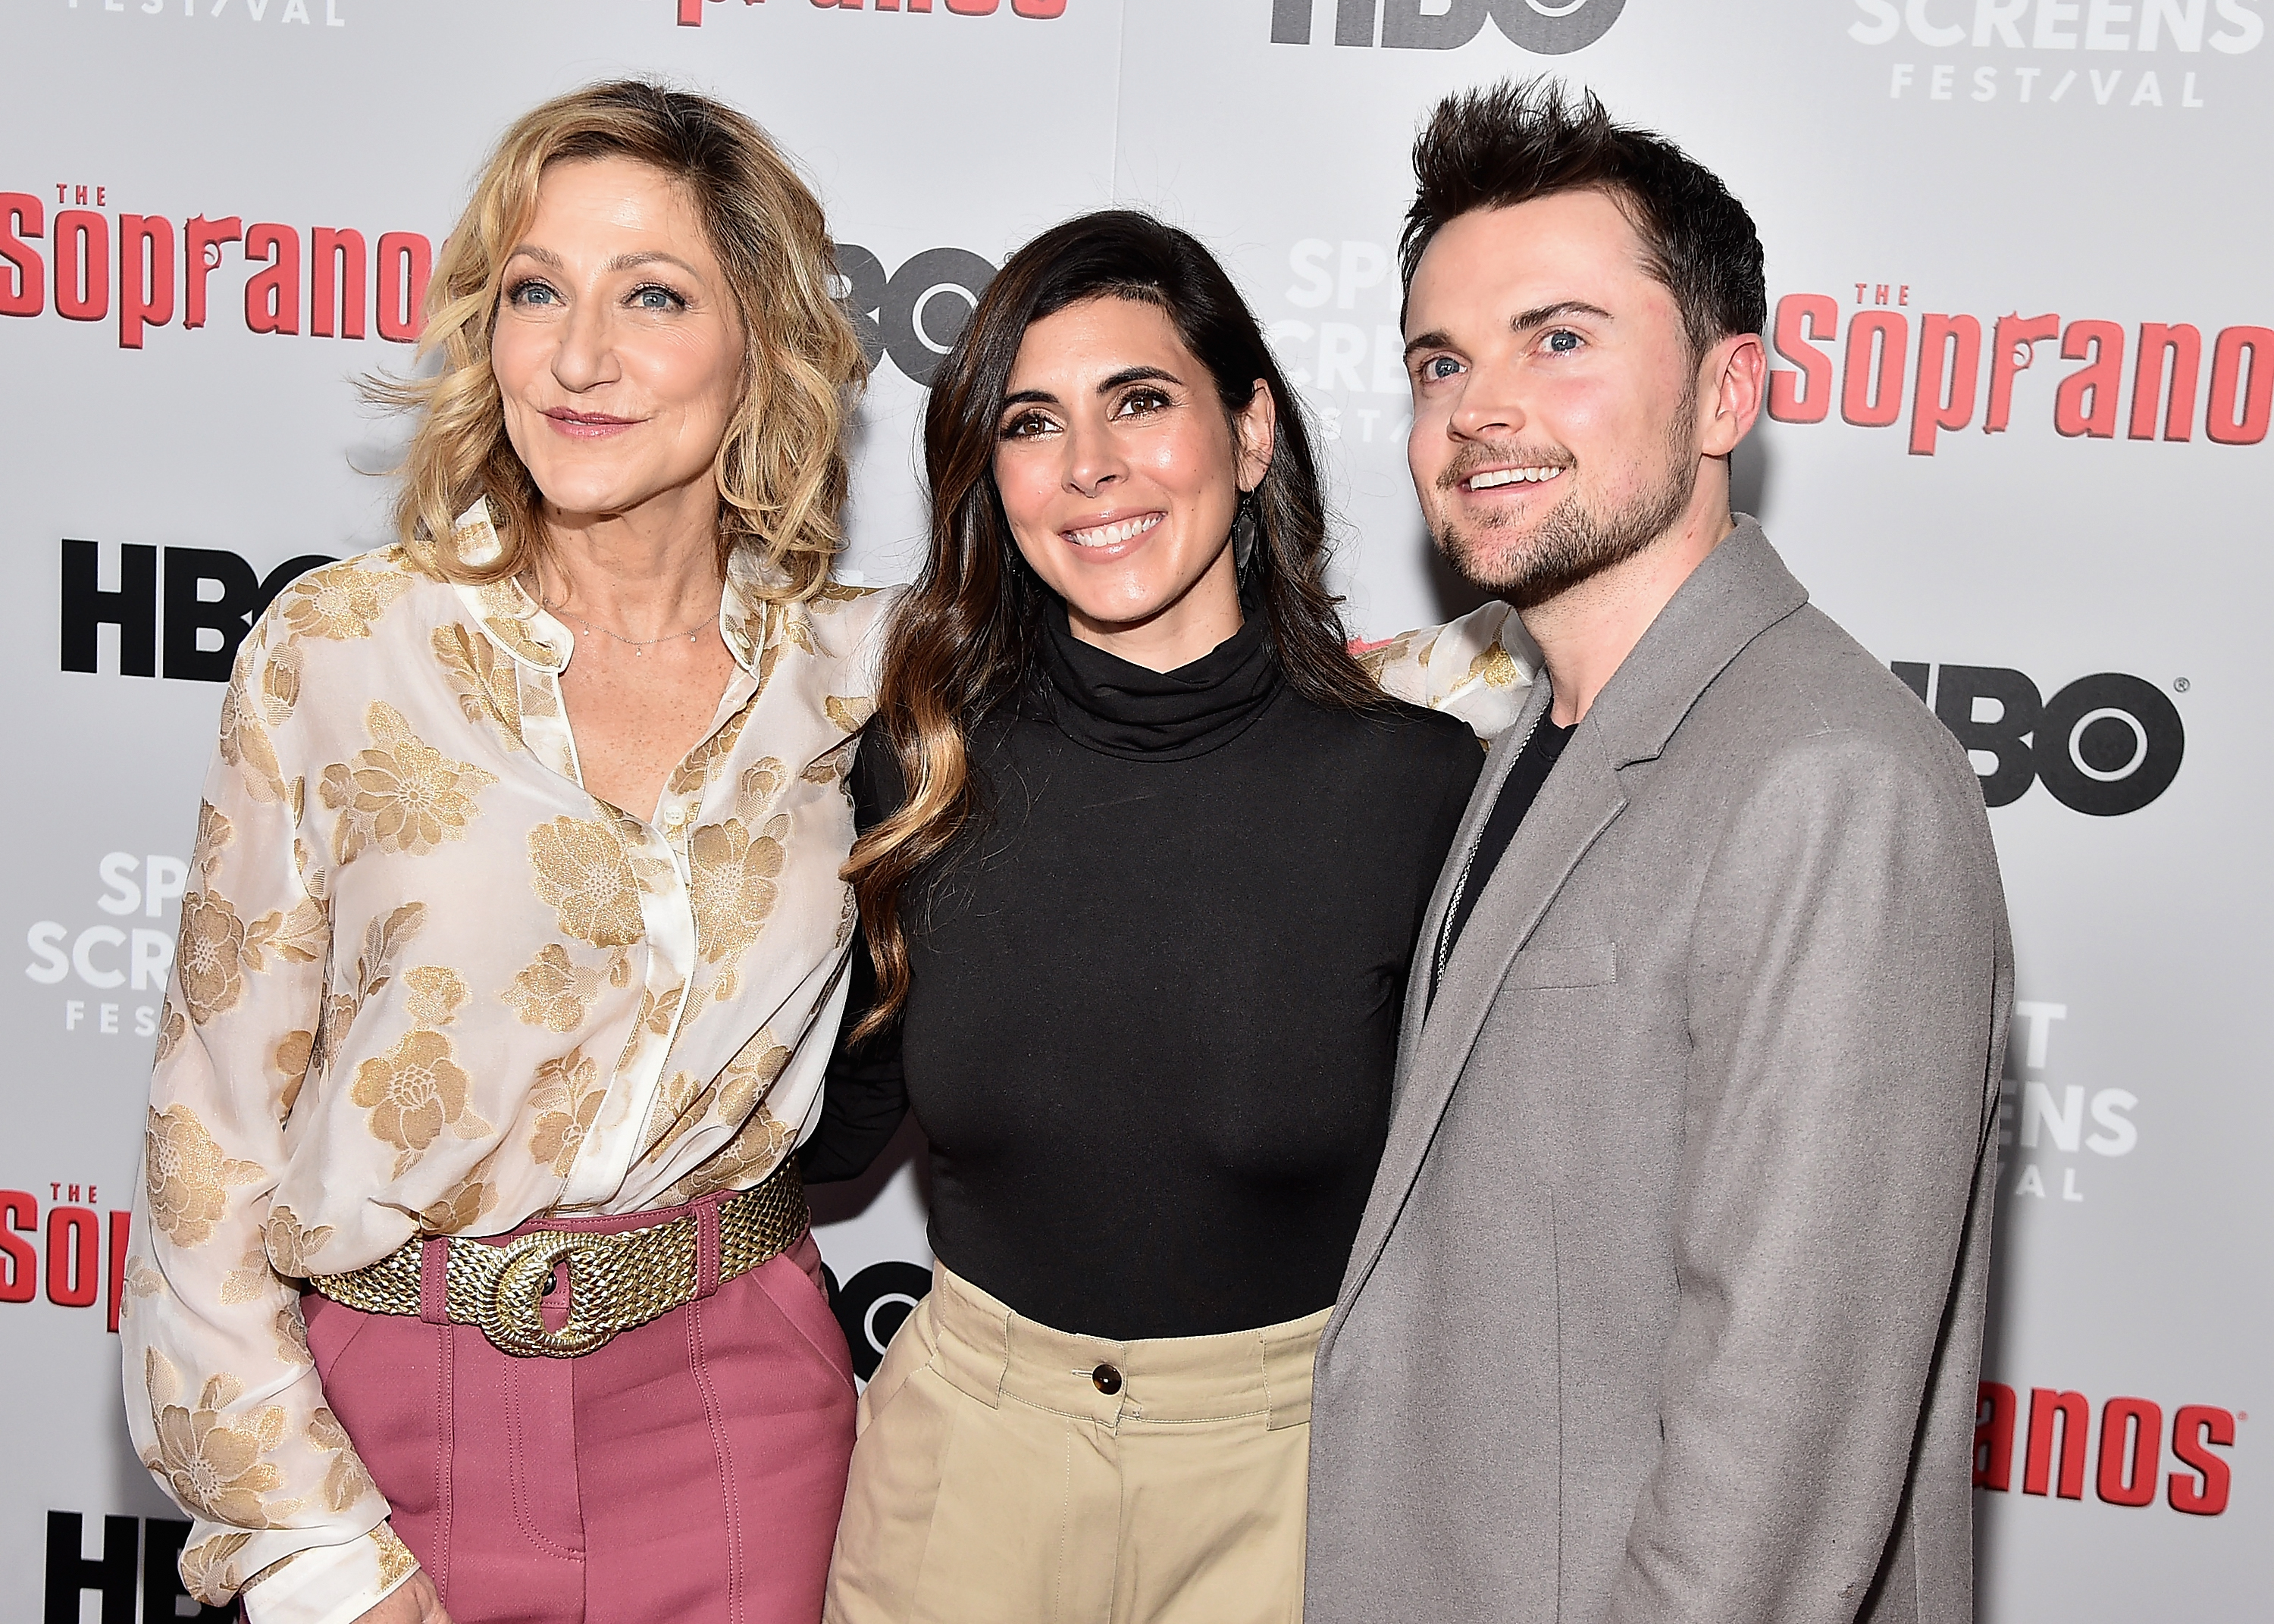 NEW YORK, NEW YORK - JANUARY 09: (L-R) Edie Falco, Robert Iler and Jamie-Lynn Sigler attend the "The Sopranos" 20th Anniversary Panel Discussion at SVA Theater on January 09, 2019 in New York City. (Photo by Theo Wargo/Getty Images)